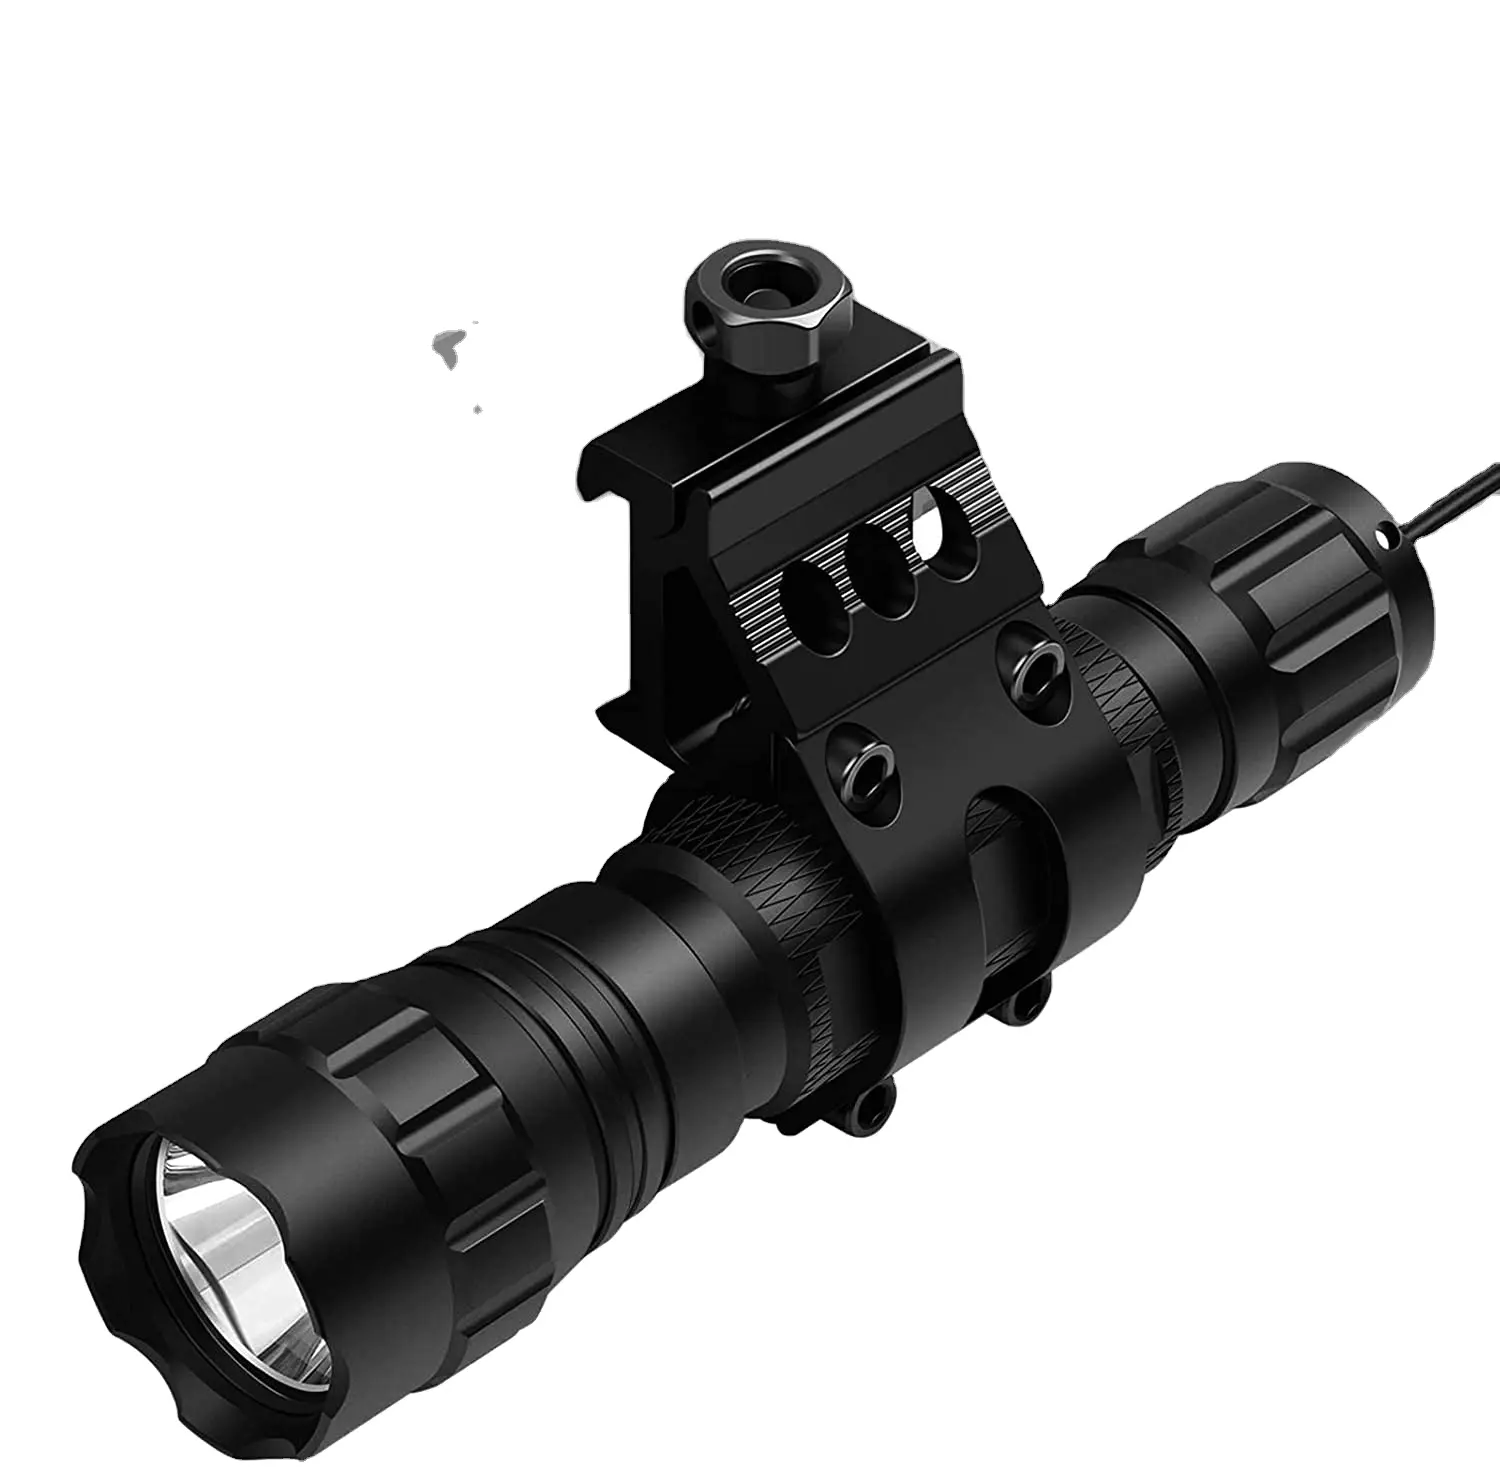 Tactical flashlight  1200 lumens  with 3 modes of weapon lights  including pressure switch  IP65 waterproof flashlight  with USB